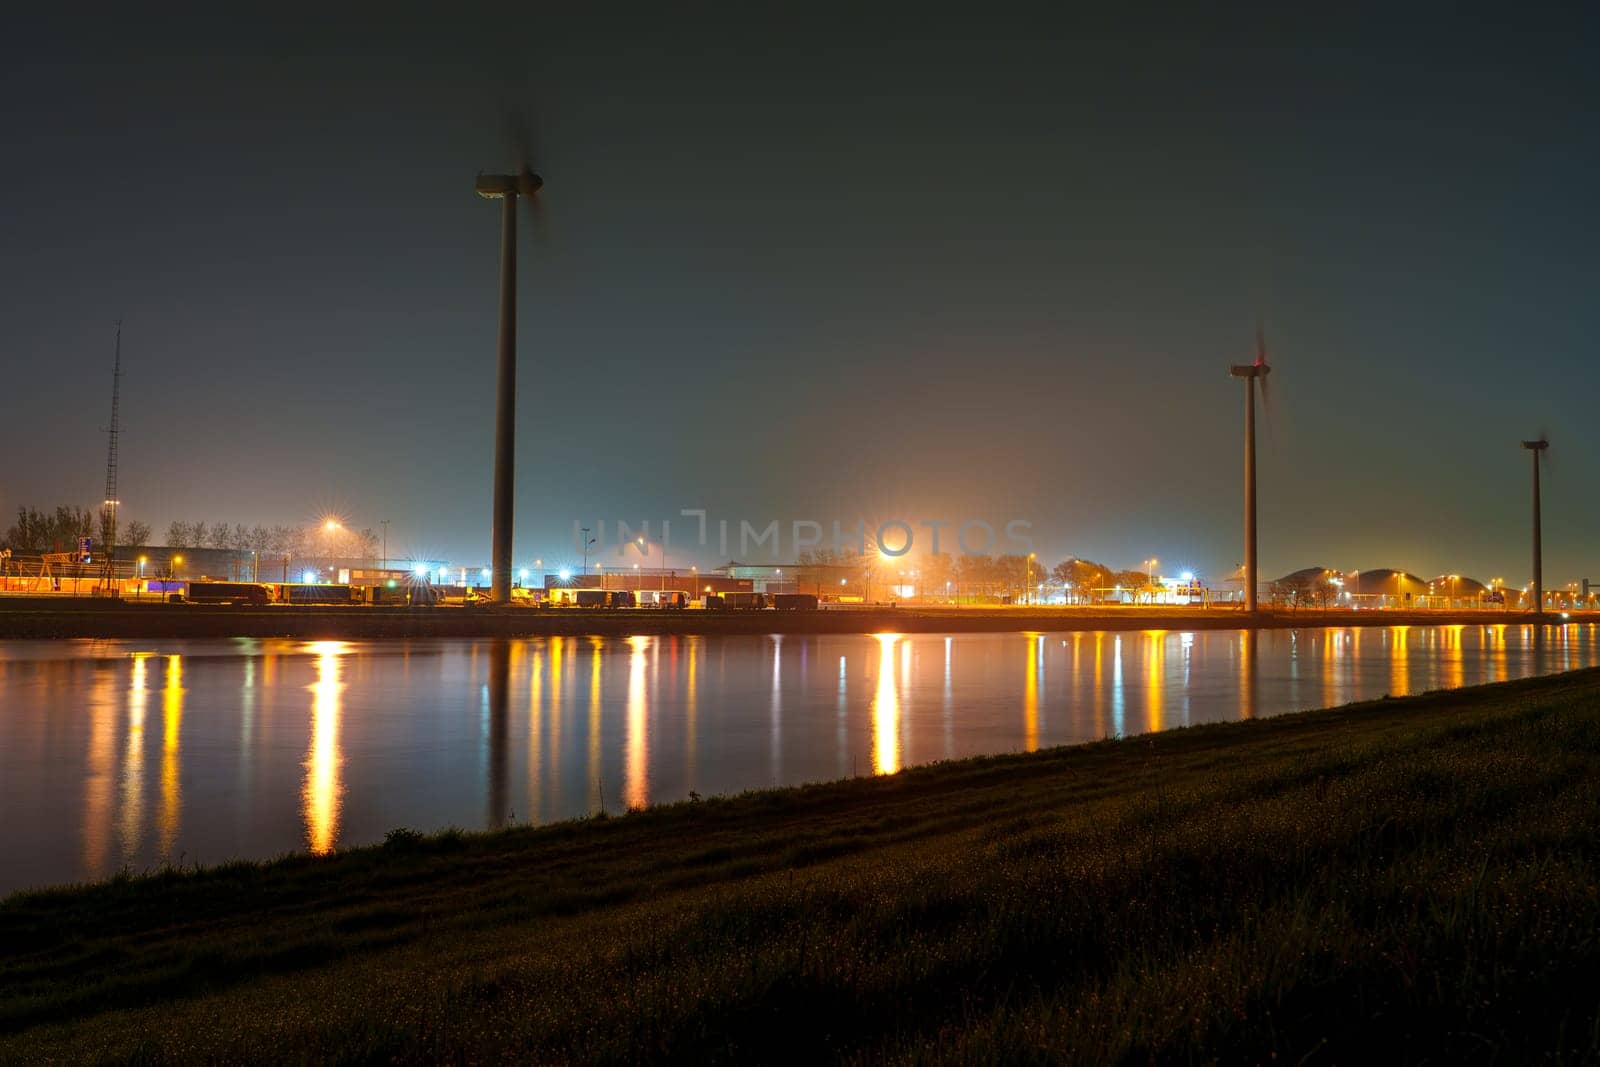 Cityscape of Rotterdam Port in Misty Night under Radiant Lights by PhotoTime